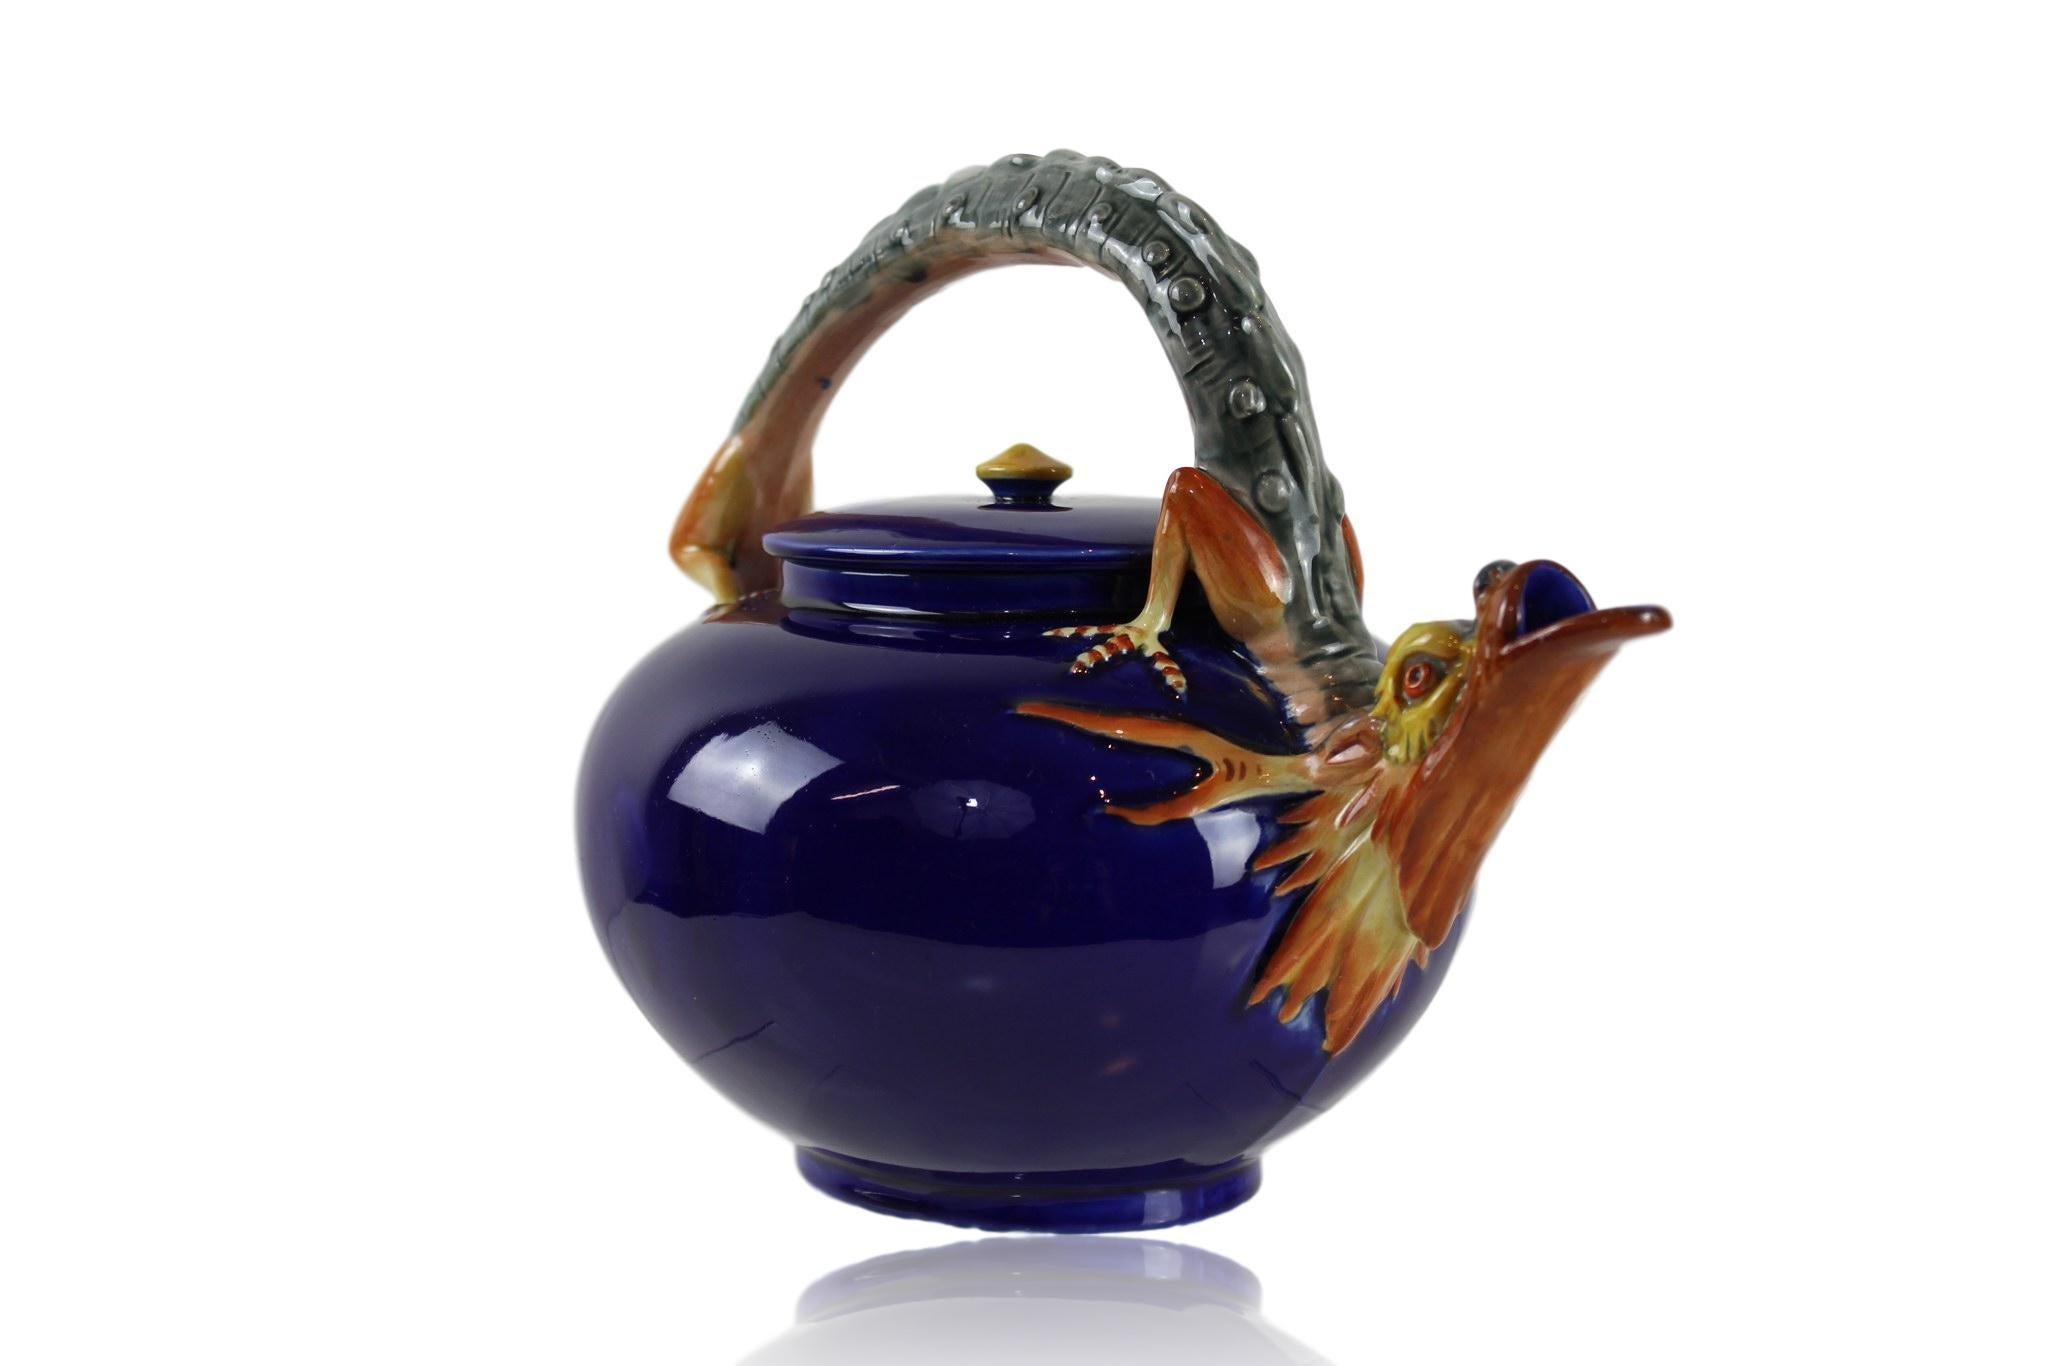 English Wedgwood Majolica Dragon Teapot in Cobalt Blue by Hugues Protât, Dated 1871